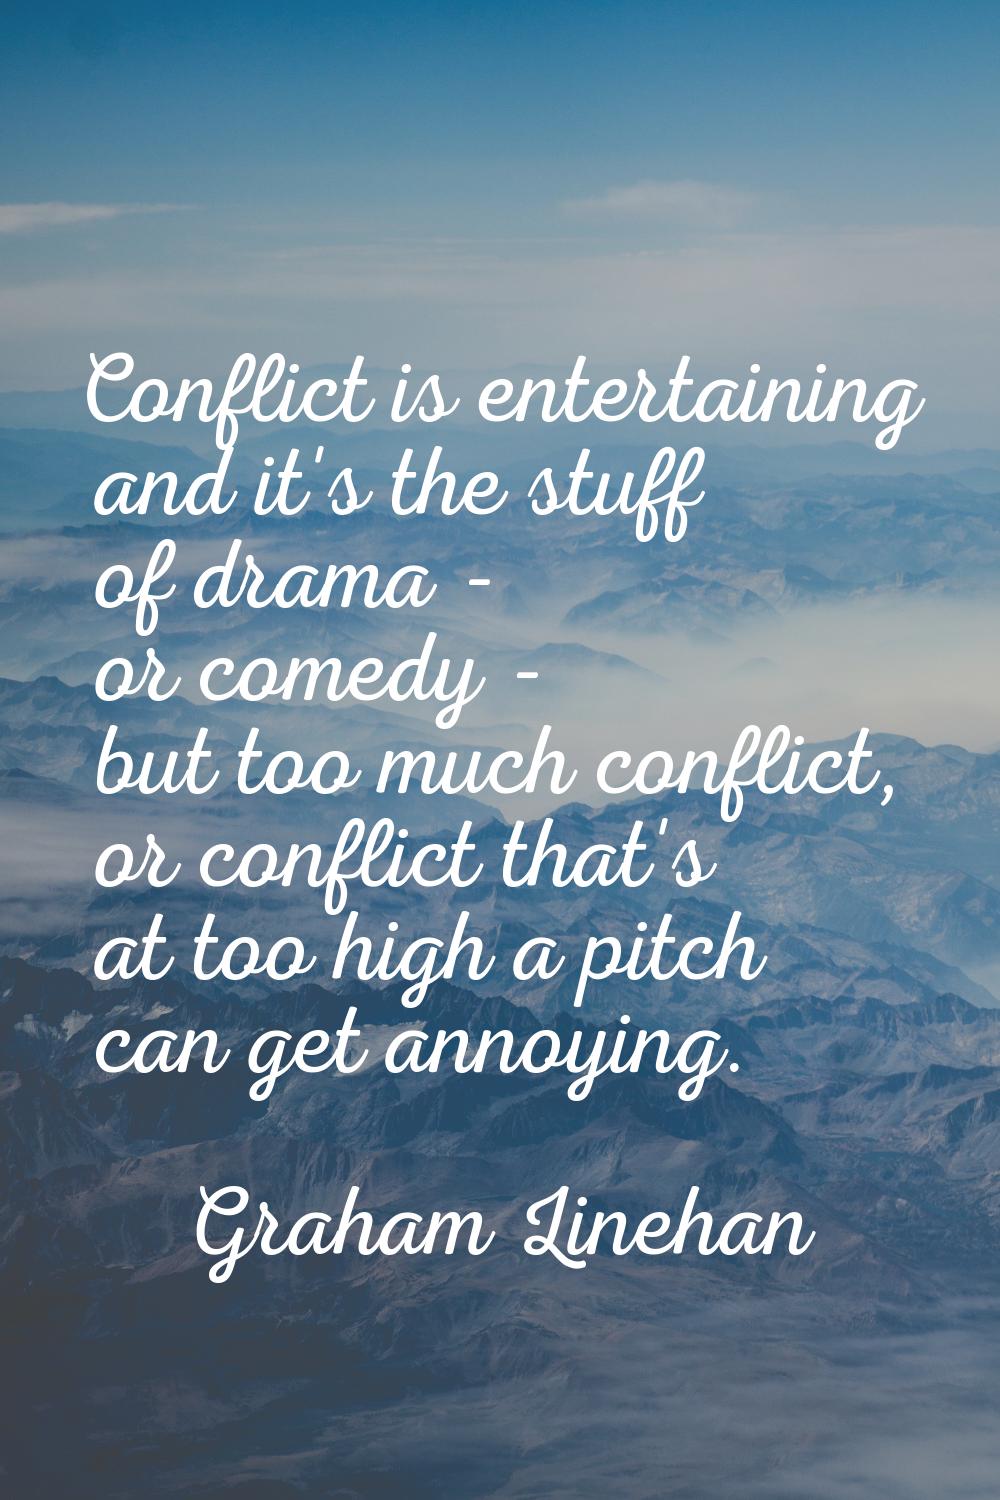 Conflict is entertaining and it's the stuff of drama - or comedy - but too much conflict, or confli